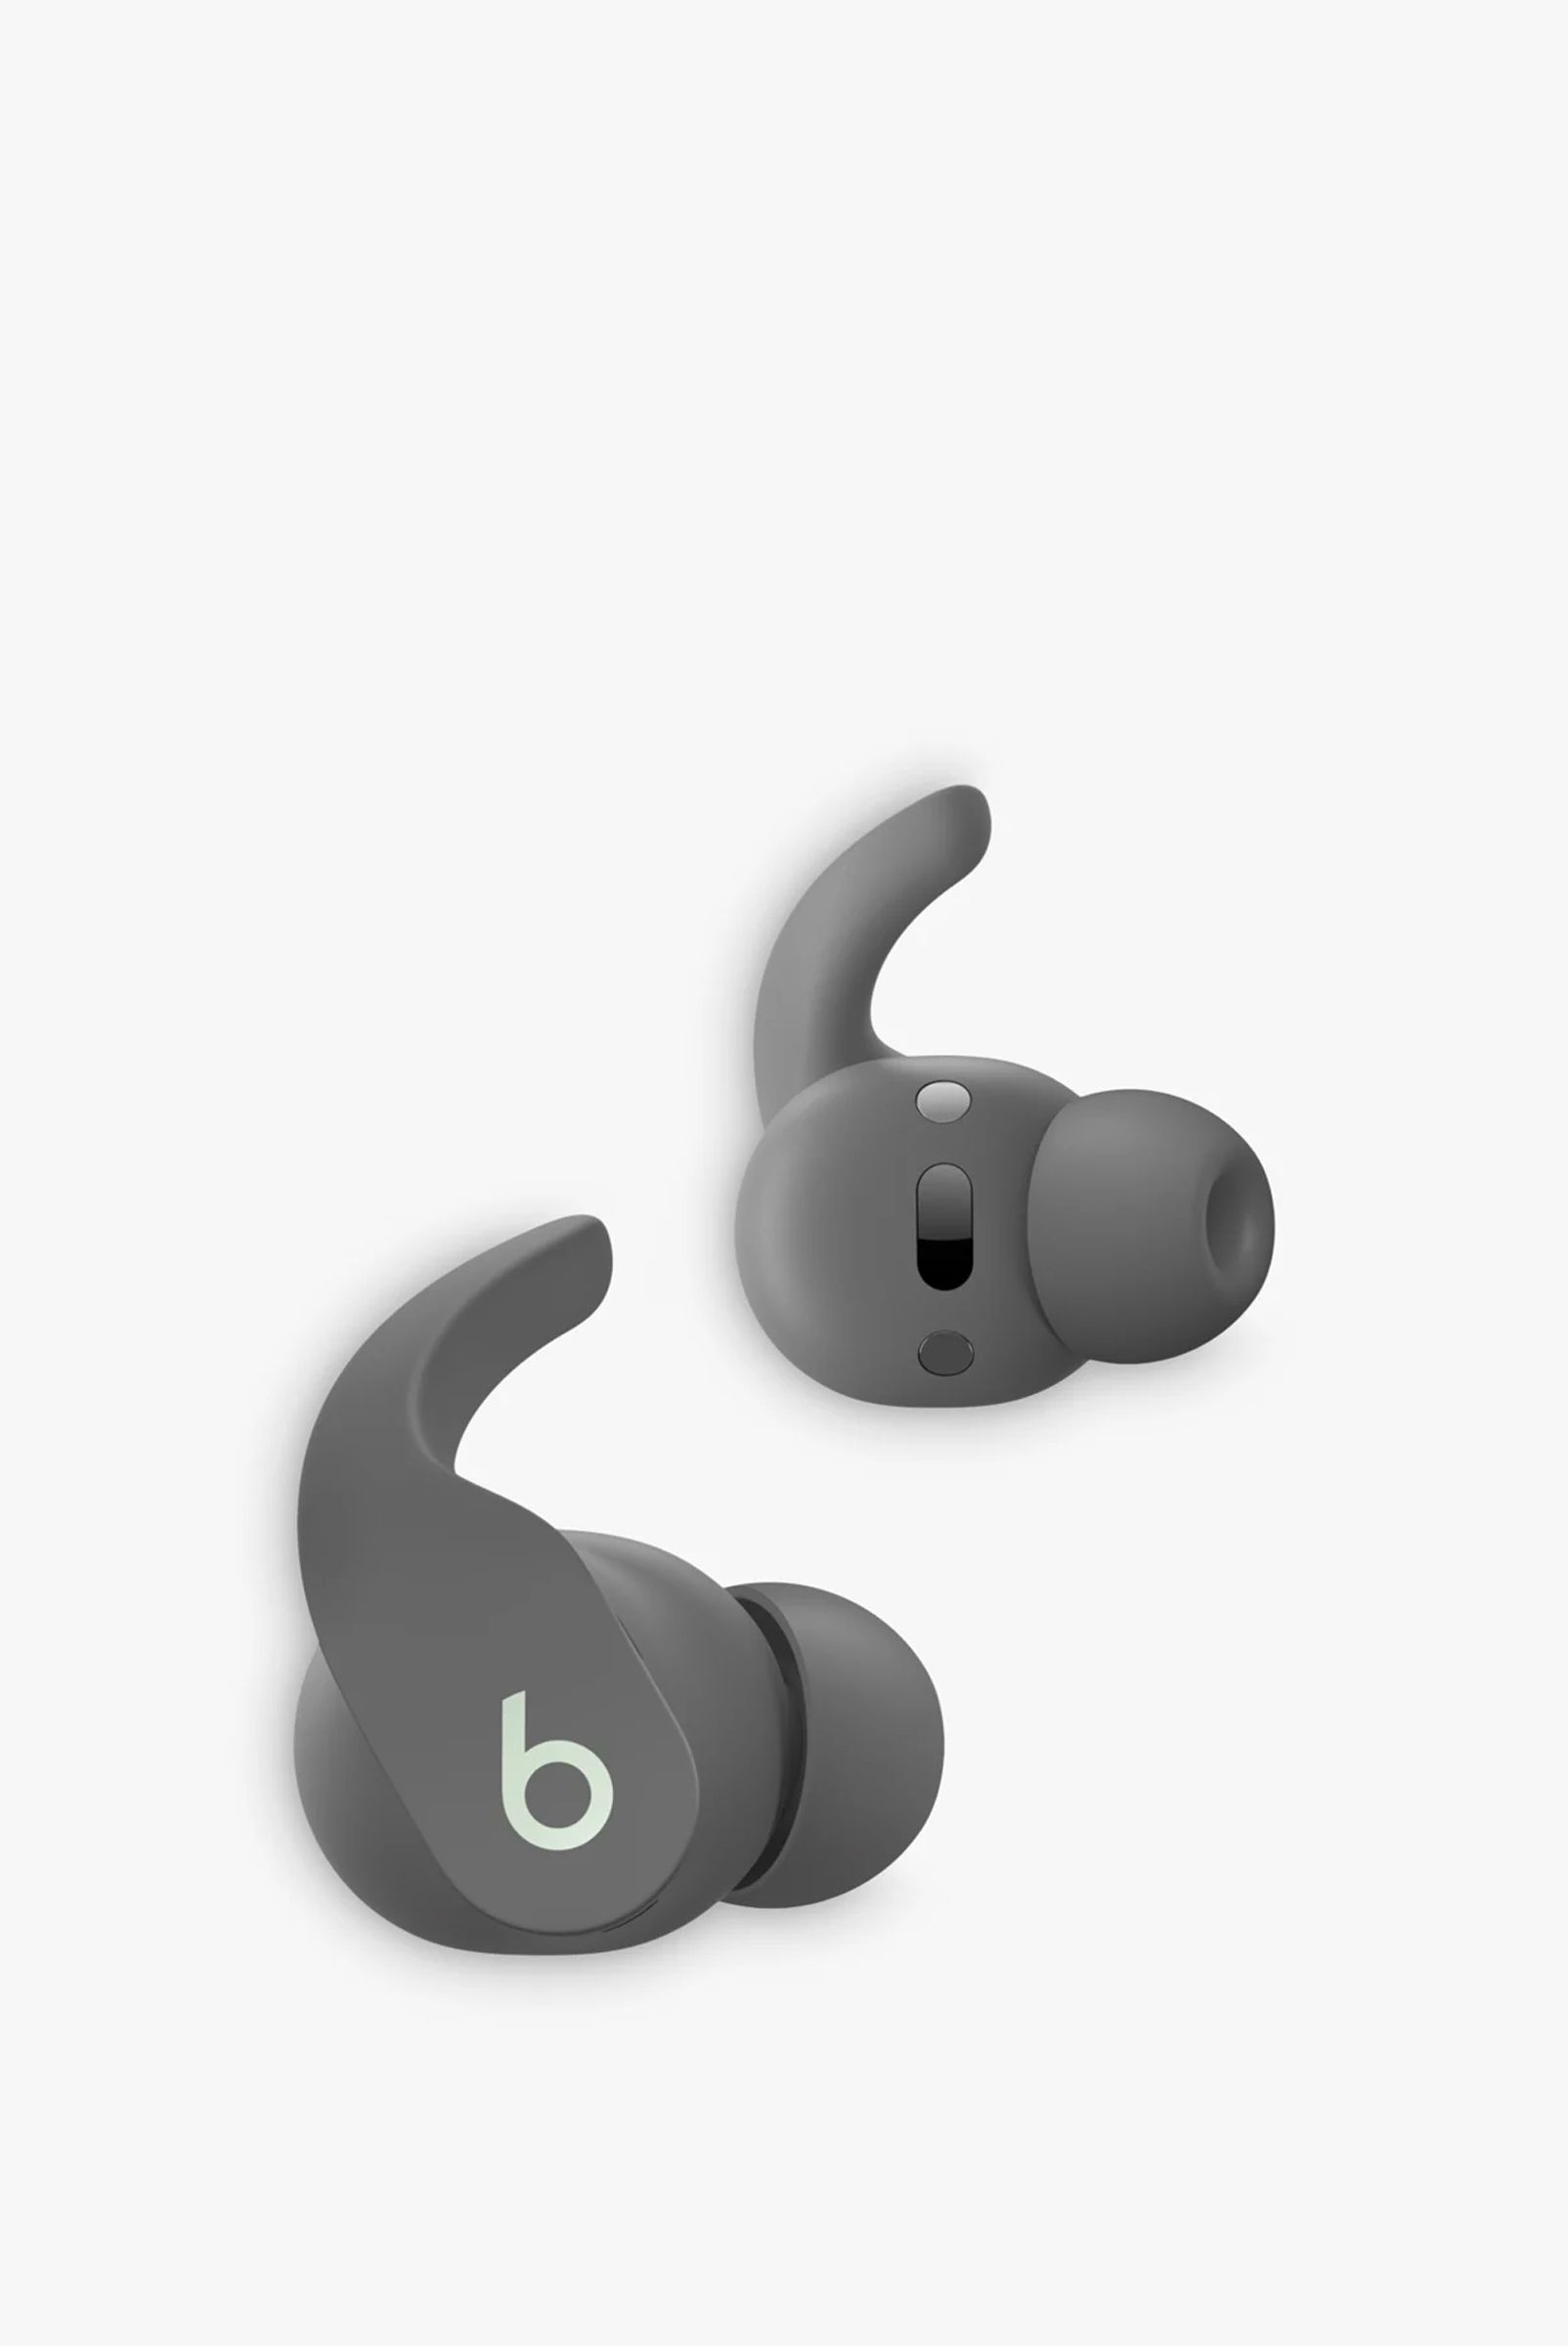 Beats Fit Pro Truhttps://author-john-lewis-prod-65.adobecqms.net/editor.html/content/1jl/en/content/browse/content/home/chiconomics-home-chiconomics-how-make-your-uni-room-feel-like-home-from-5.html#e Wireless Bluetooth In-Ear Sport Headphones with Active Noise Cancelling, £179.99